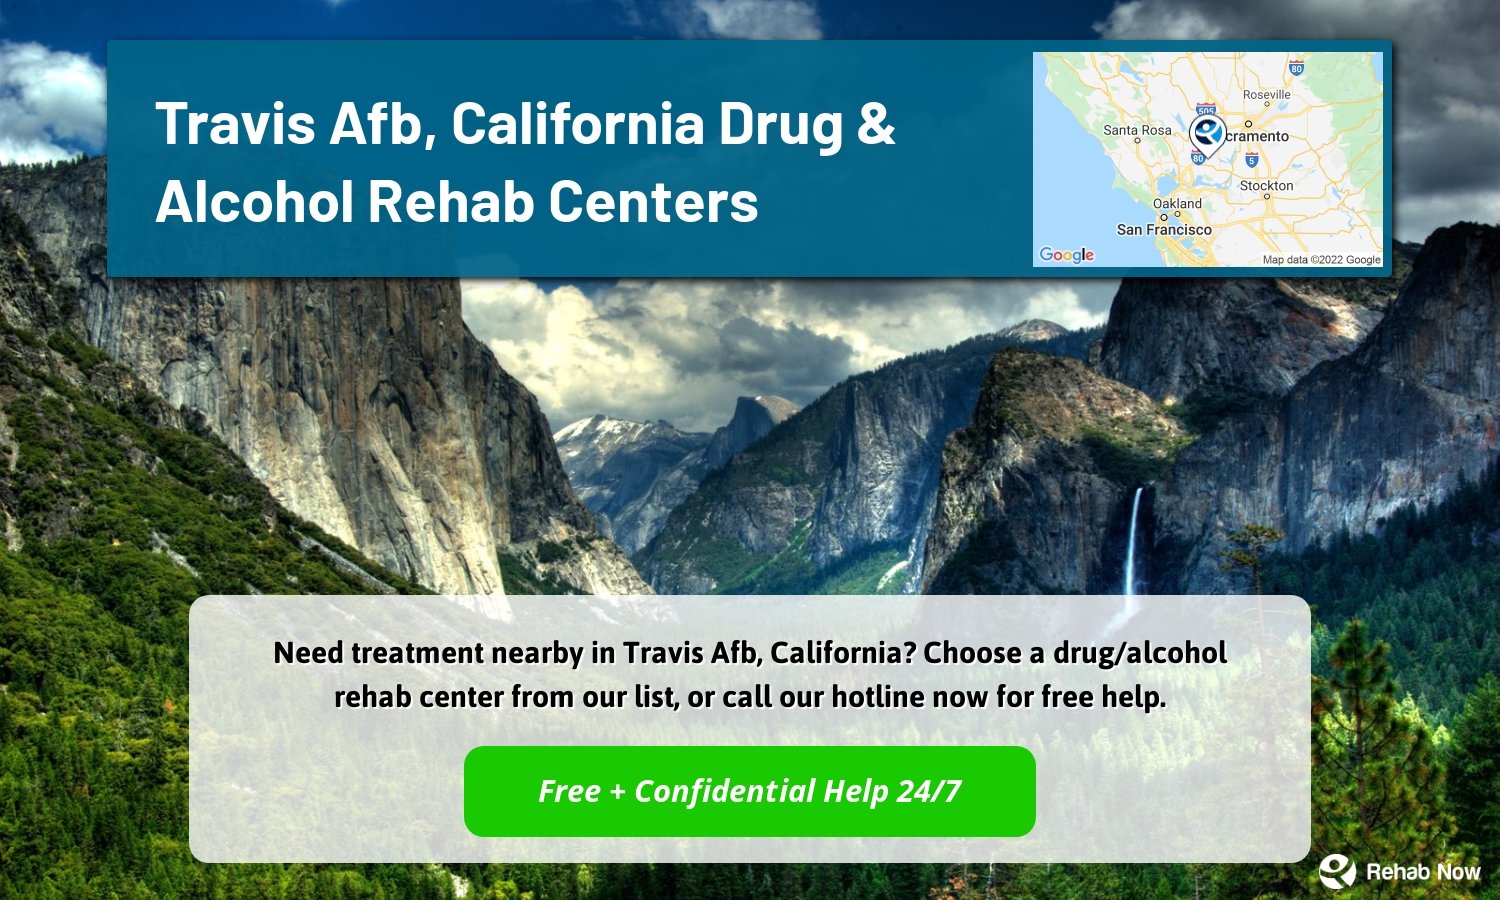 Need treatment nearby in Travis Afb, California? Choose a drug/alcohol rehab center from our list, or call our hotline now for free help.